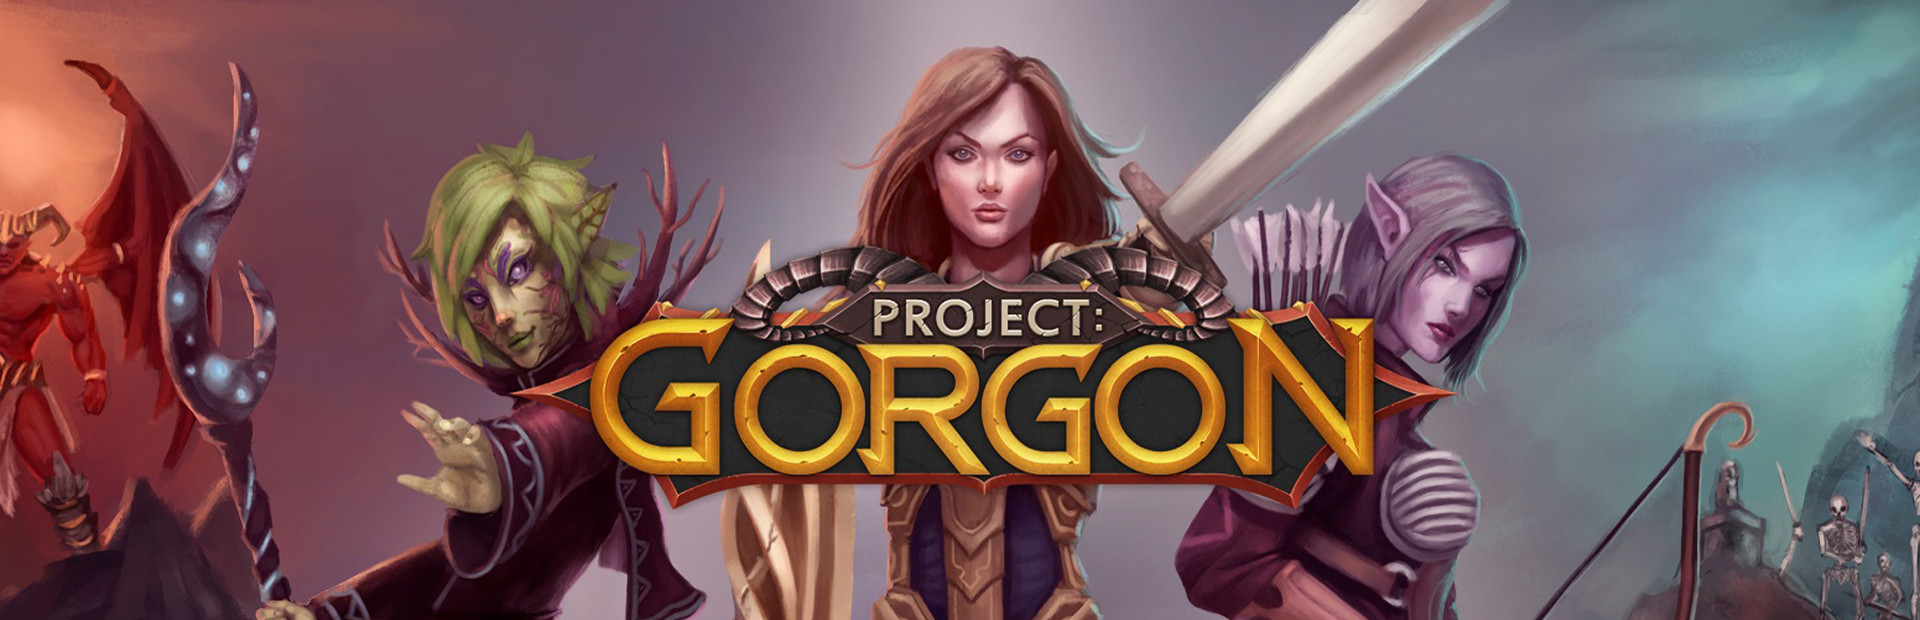 Project: Gorgon cover image